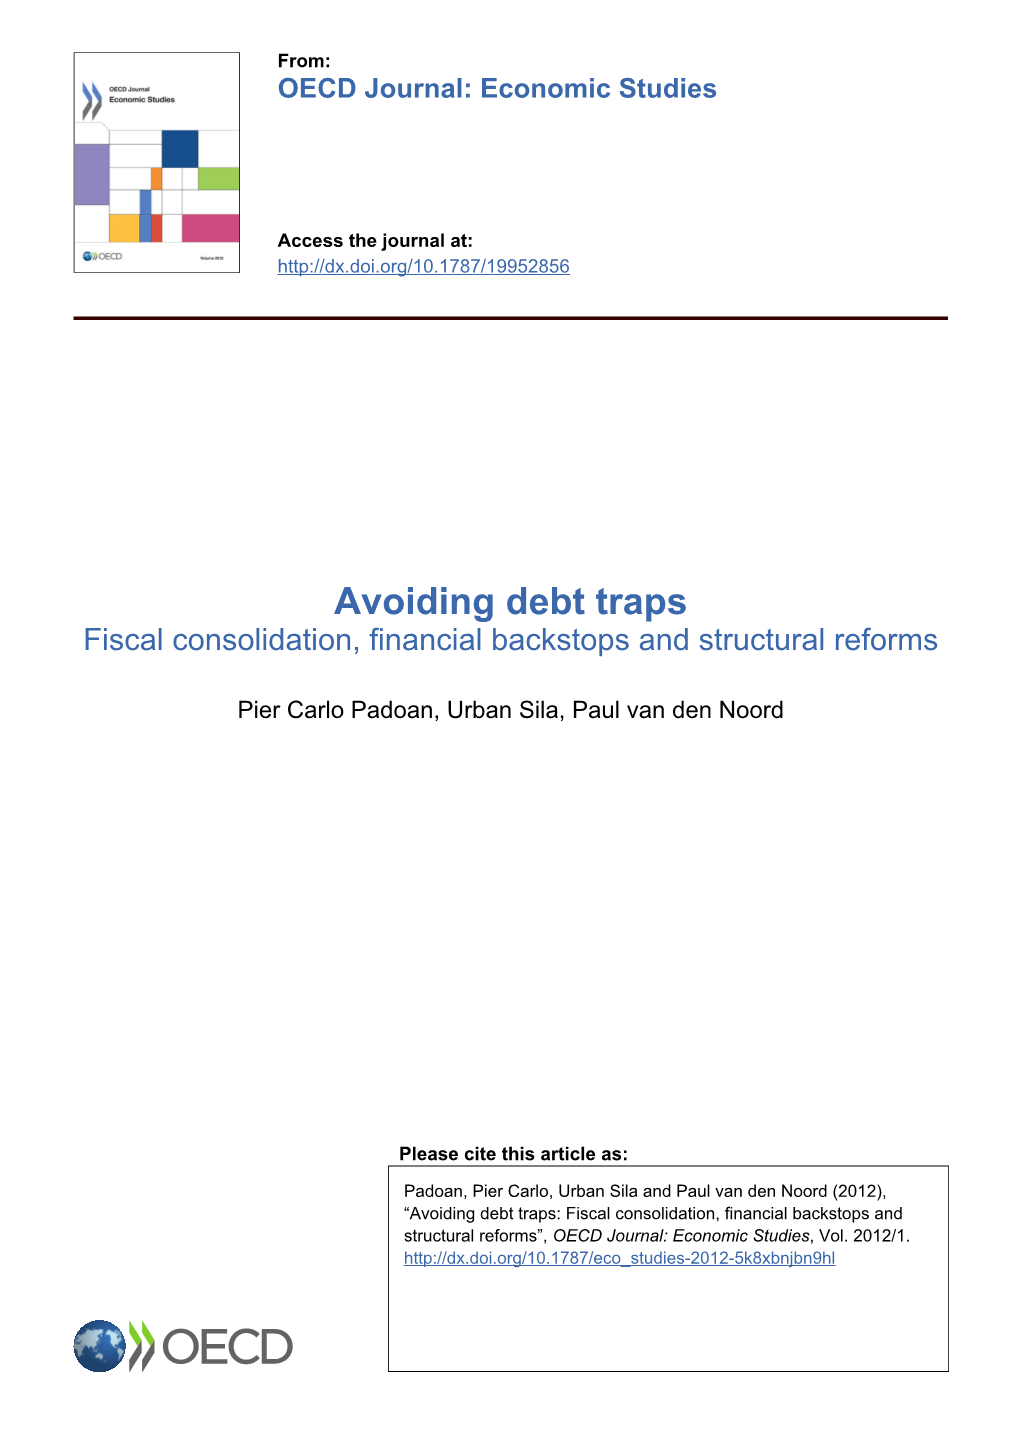 Avoiding Debt Traps Fiscal Consolidation, Financial Backstops and Structural Reforms